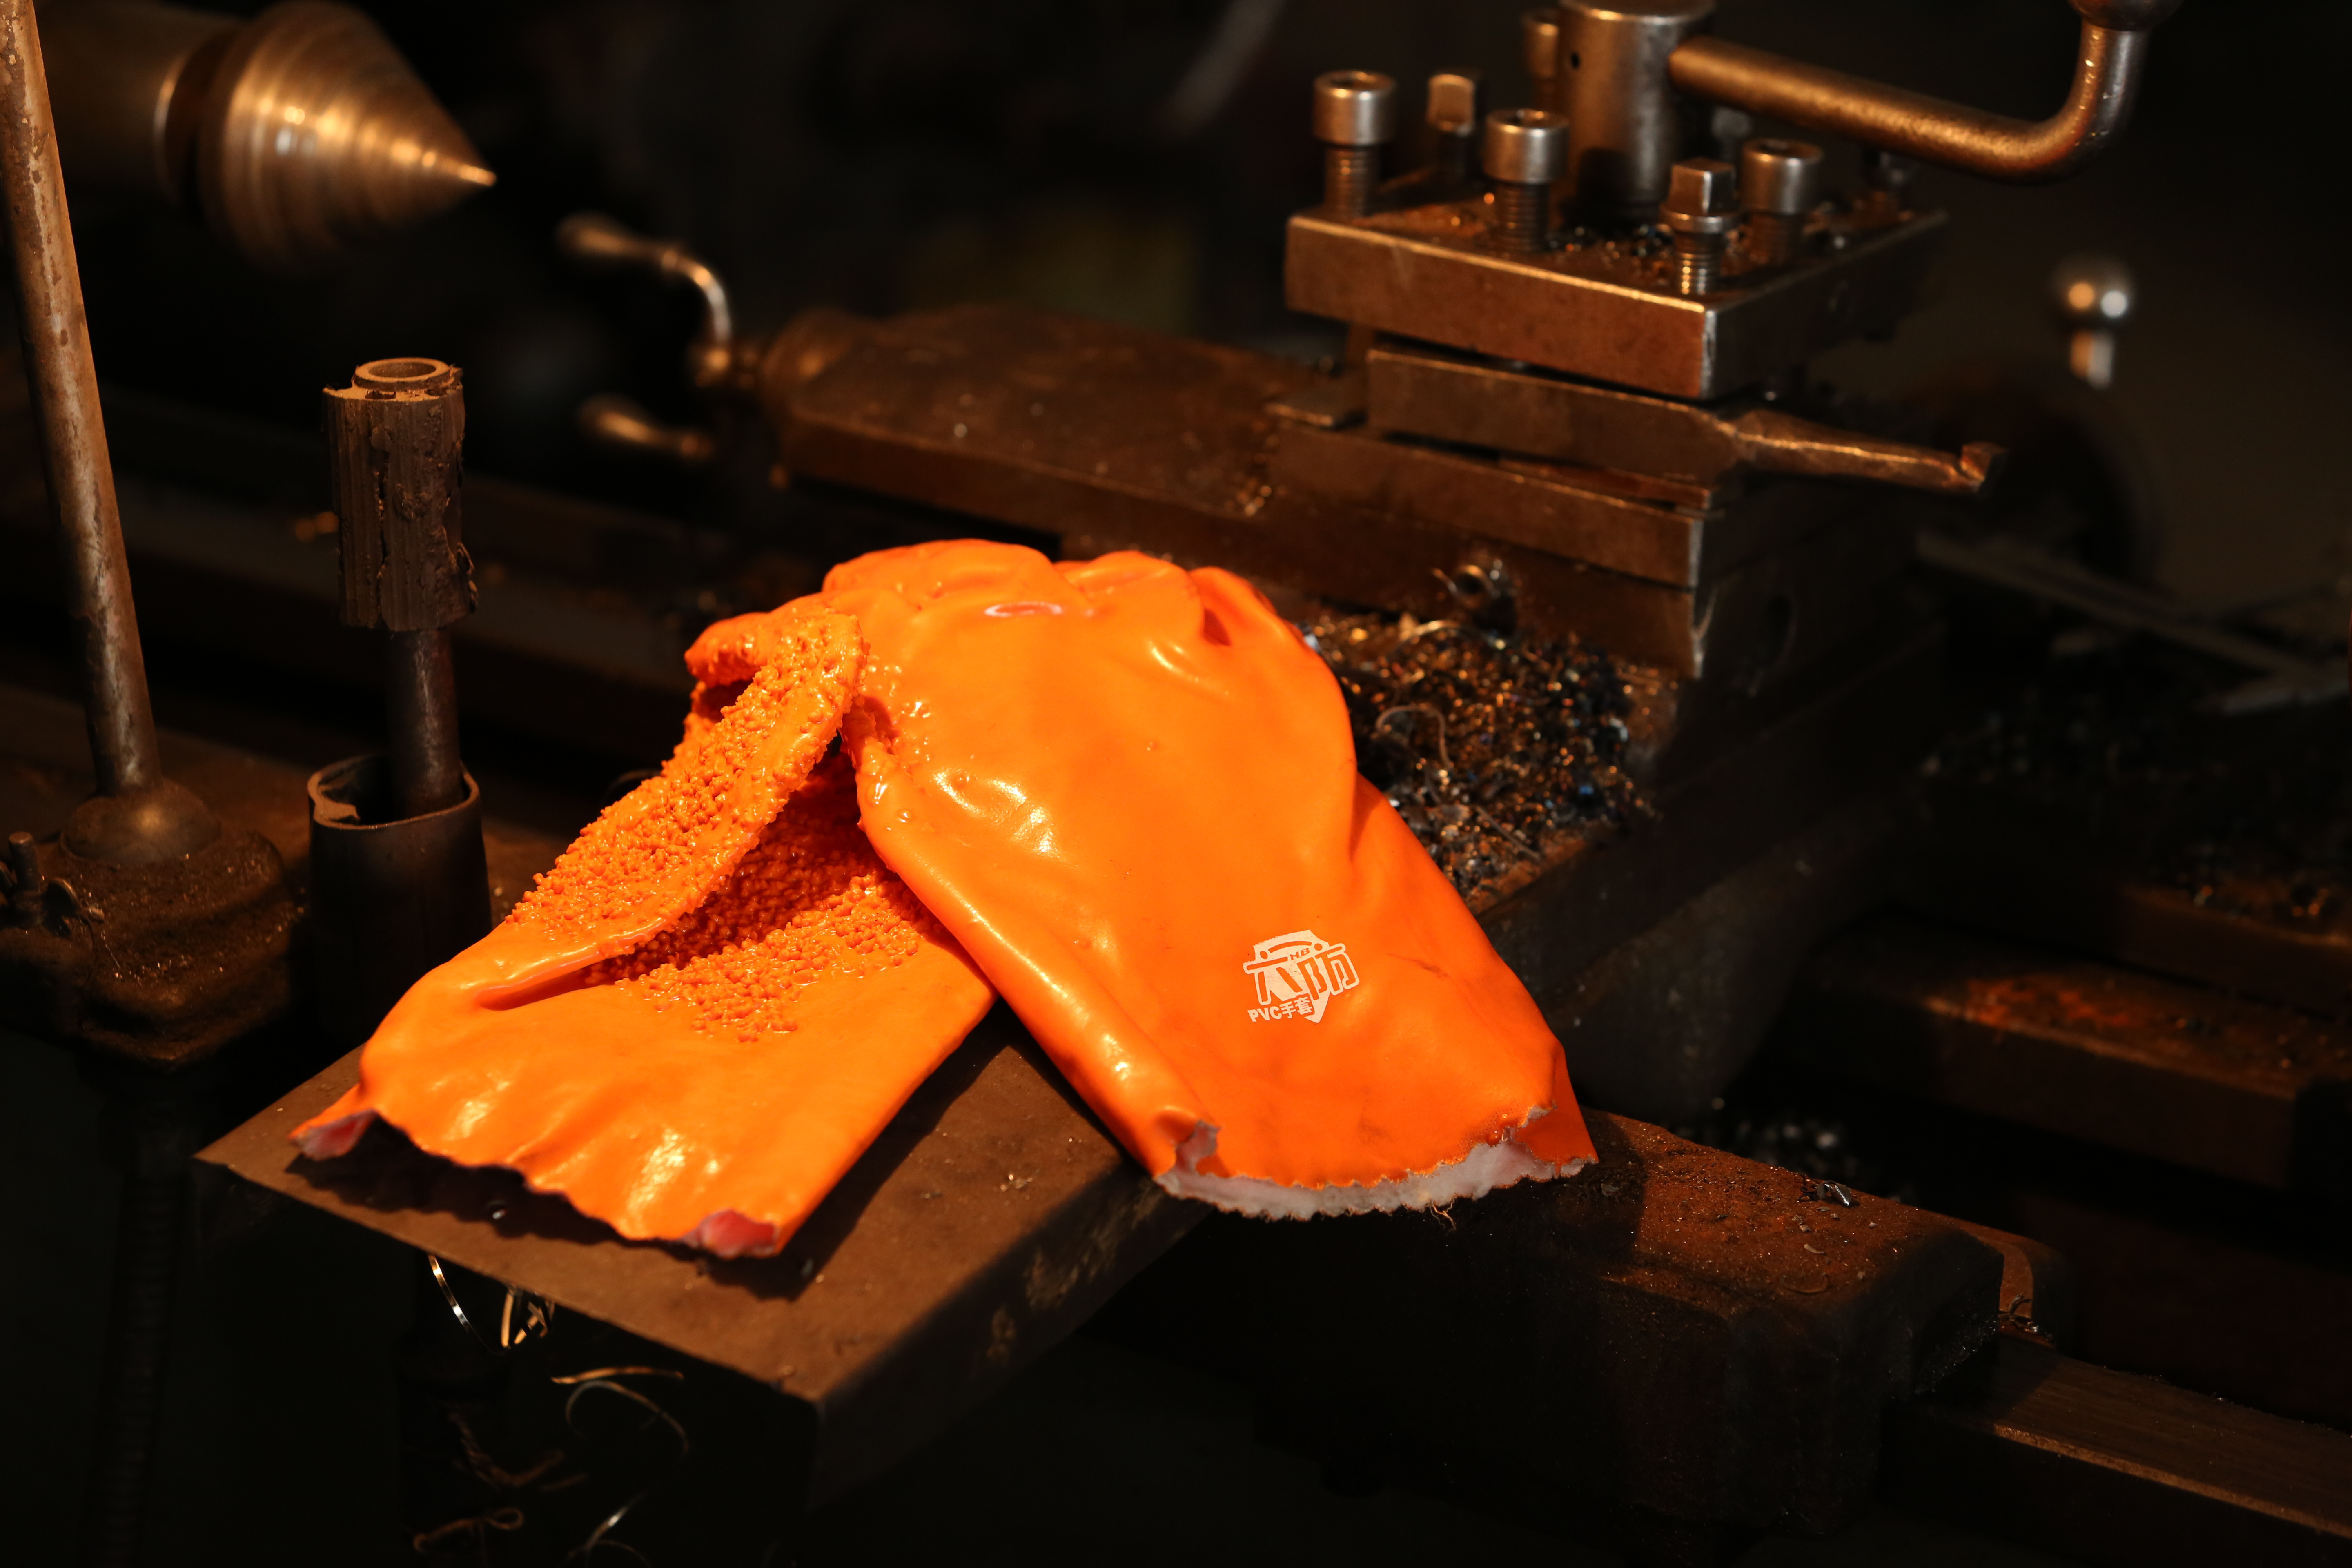 Orange pvc coated gloves chips on the palm